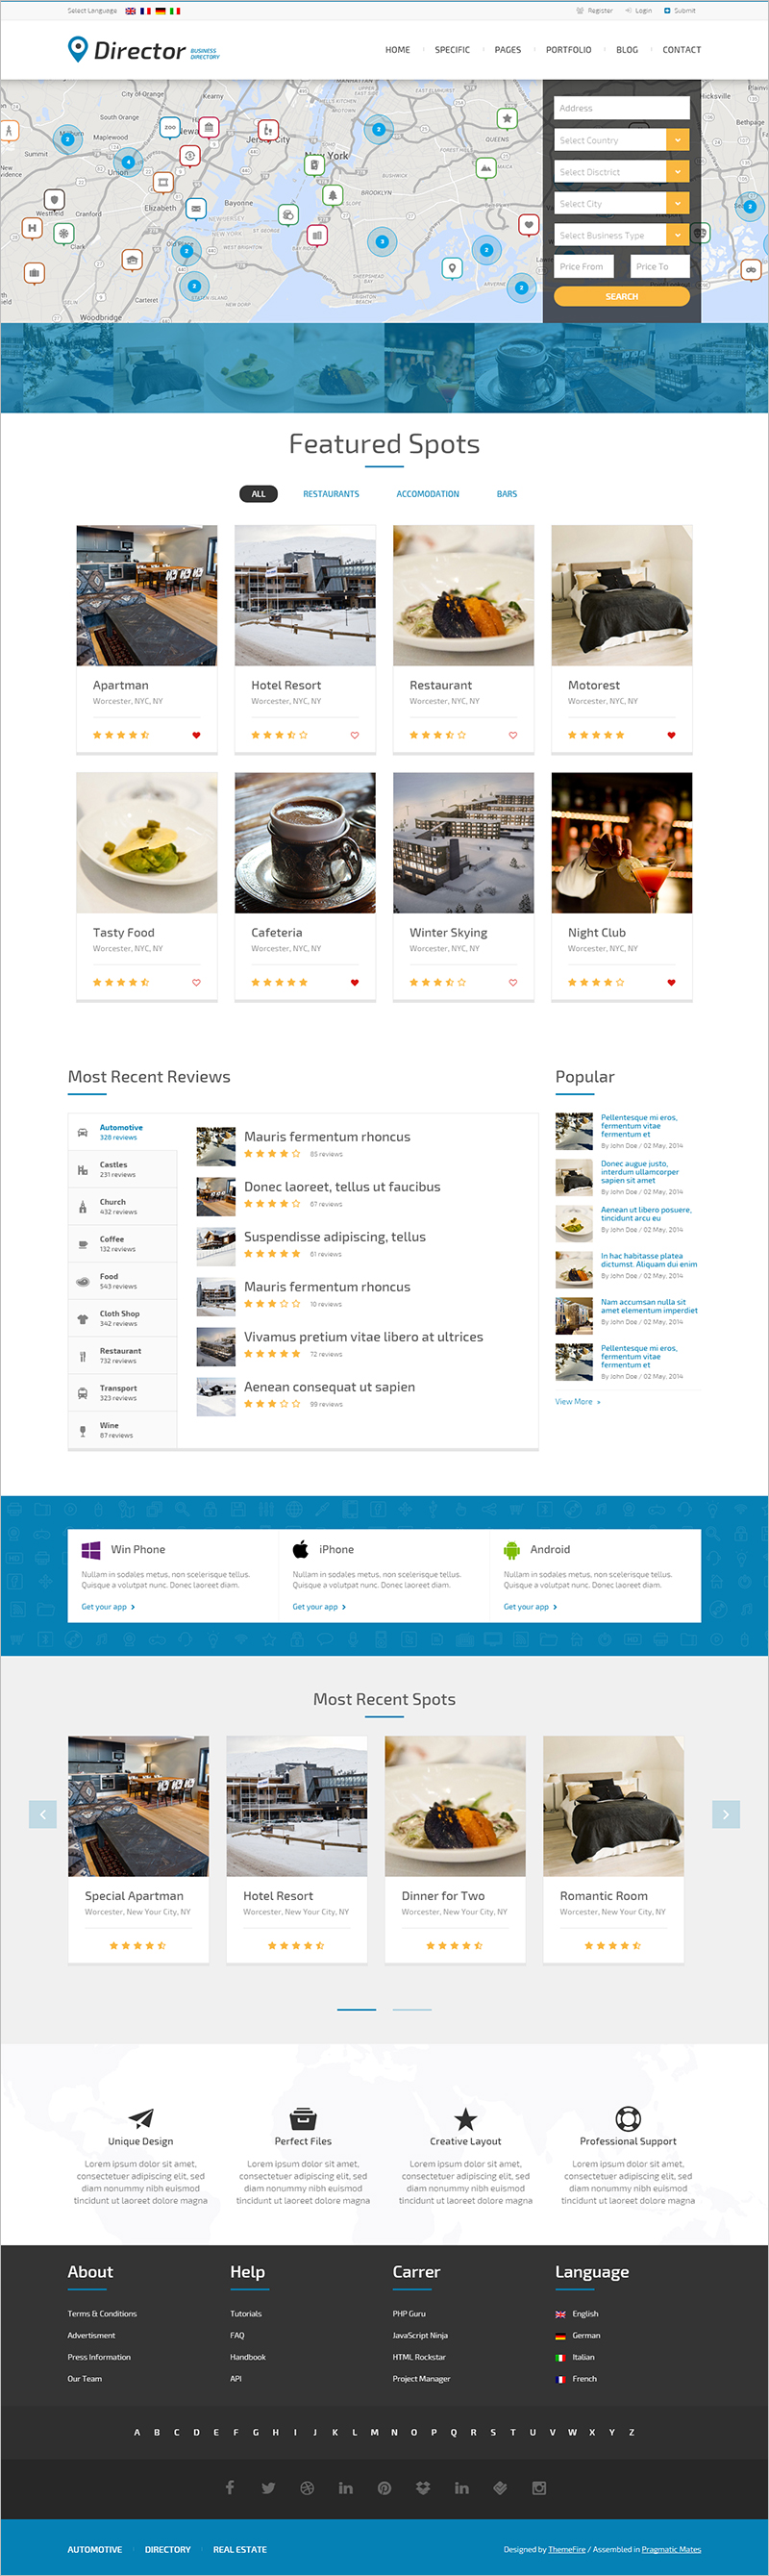 Business Directory Web Template - Car,Real Estate & Business